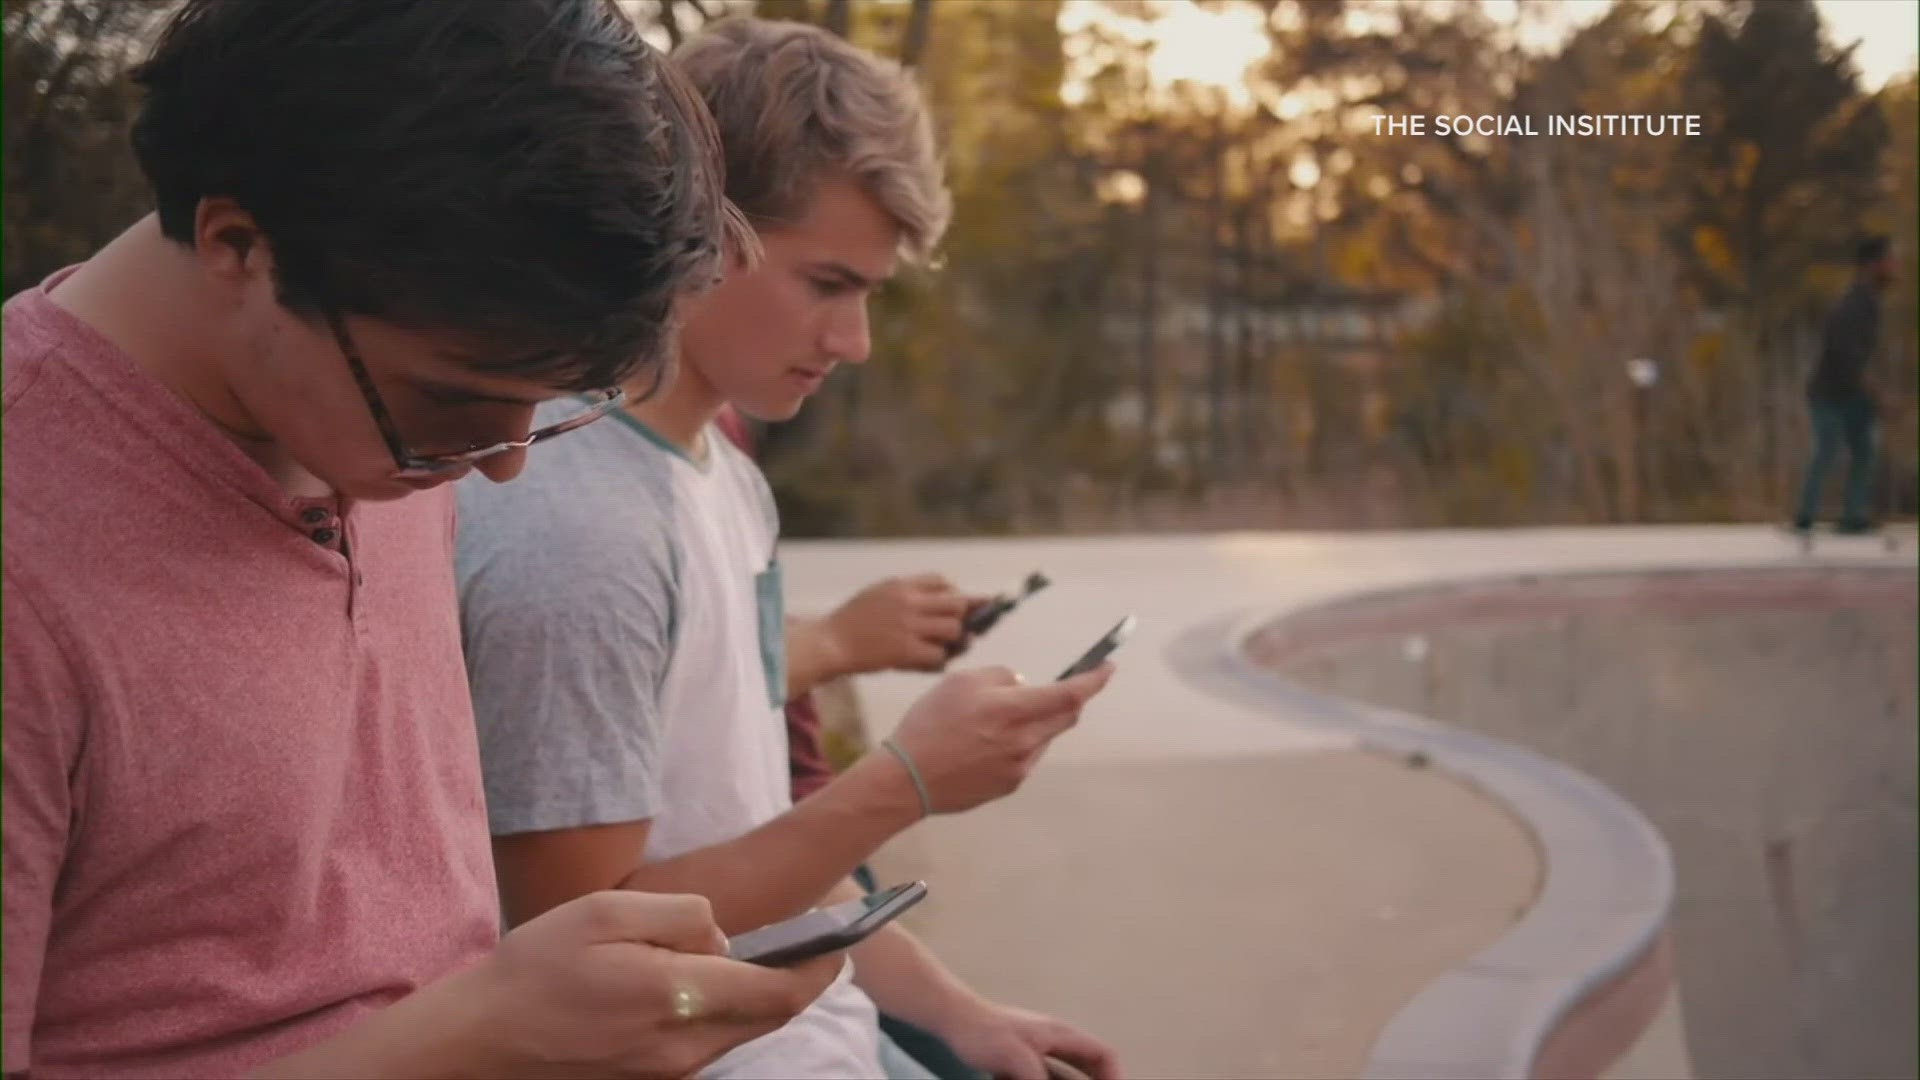 Two teens share lessons learned from experimenting with social media at a young age.